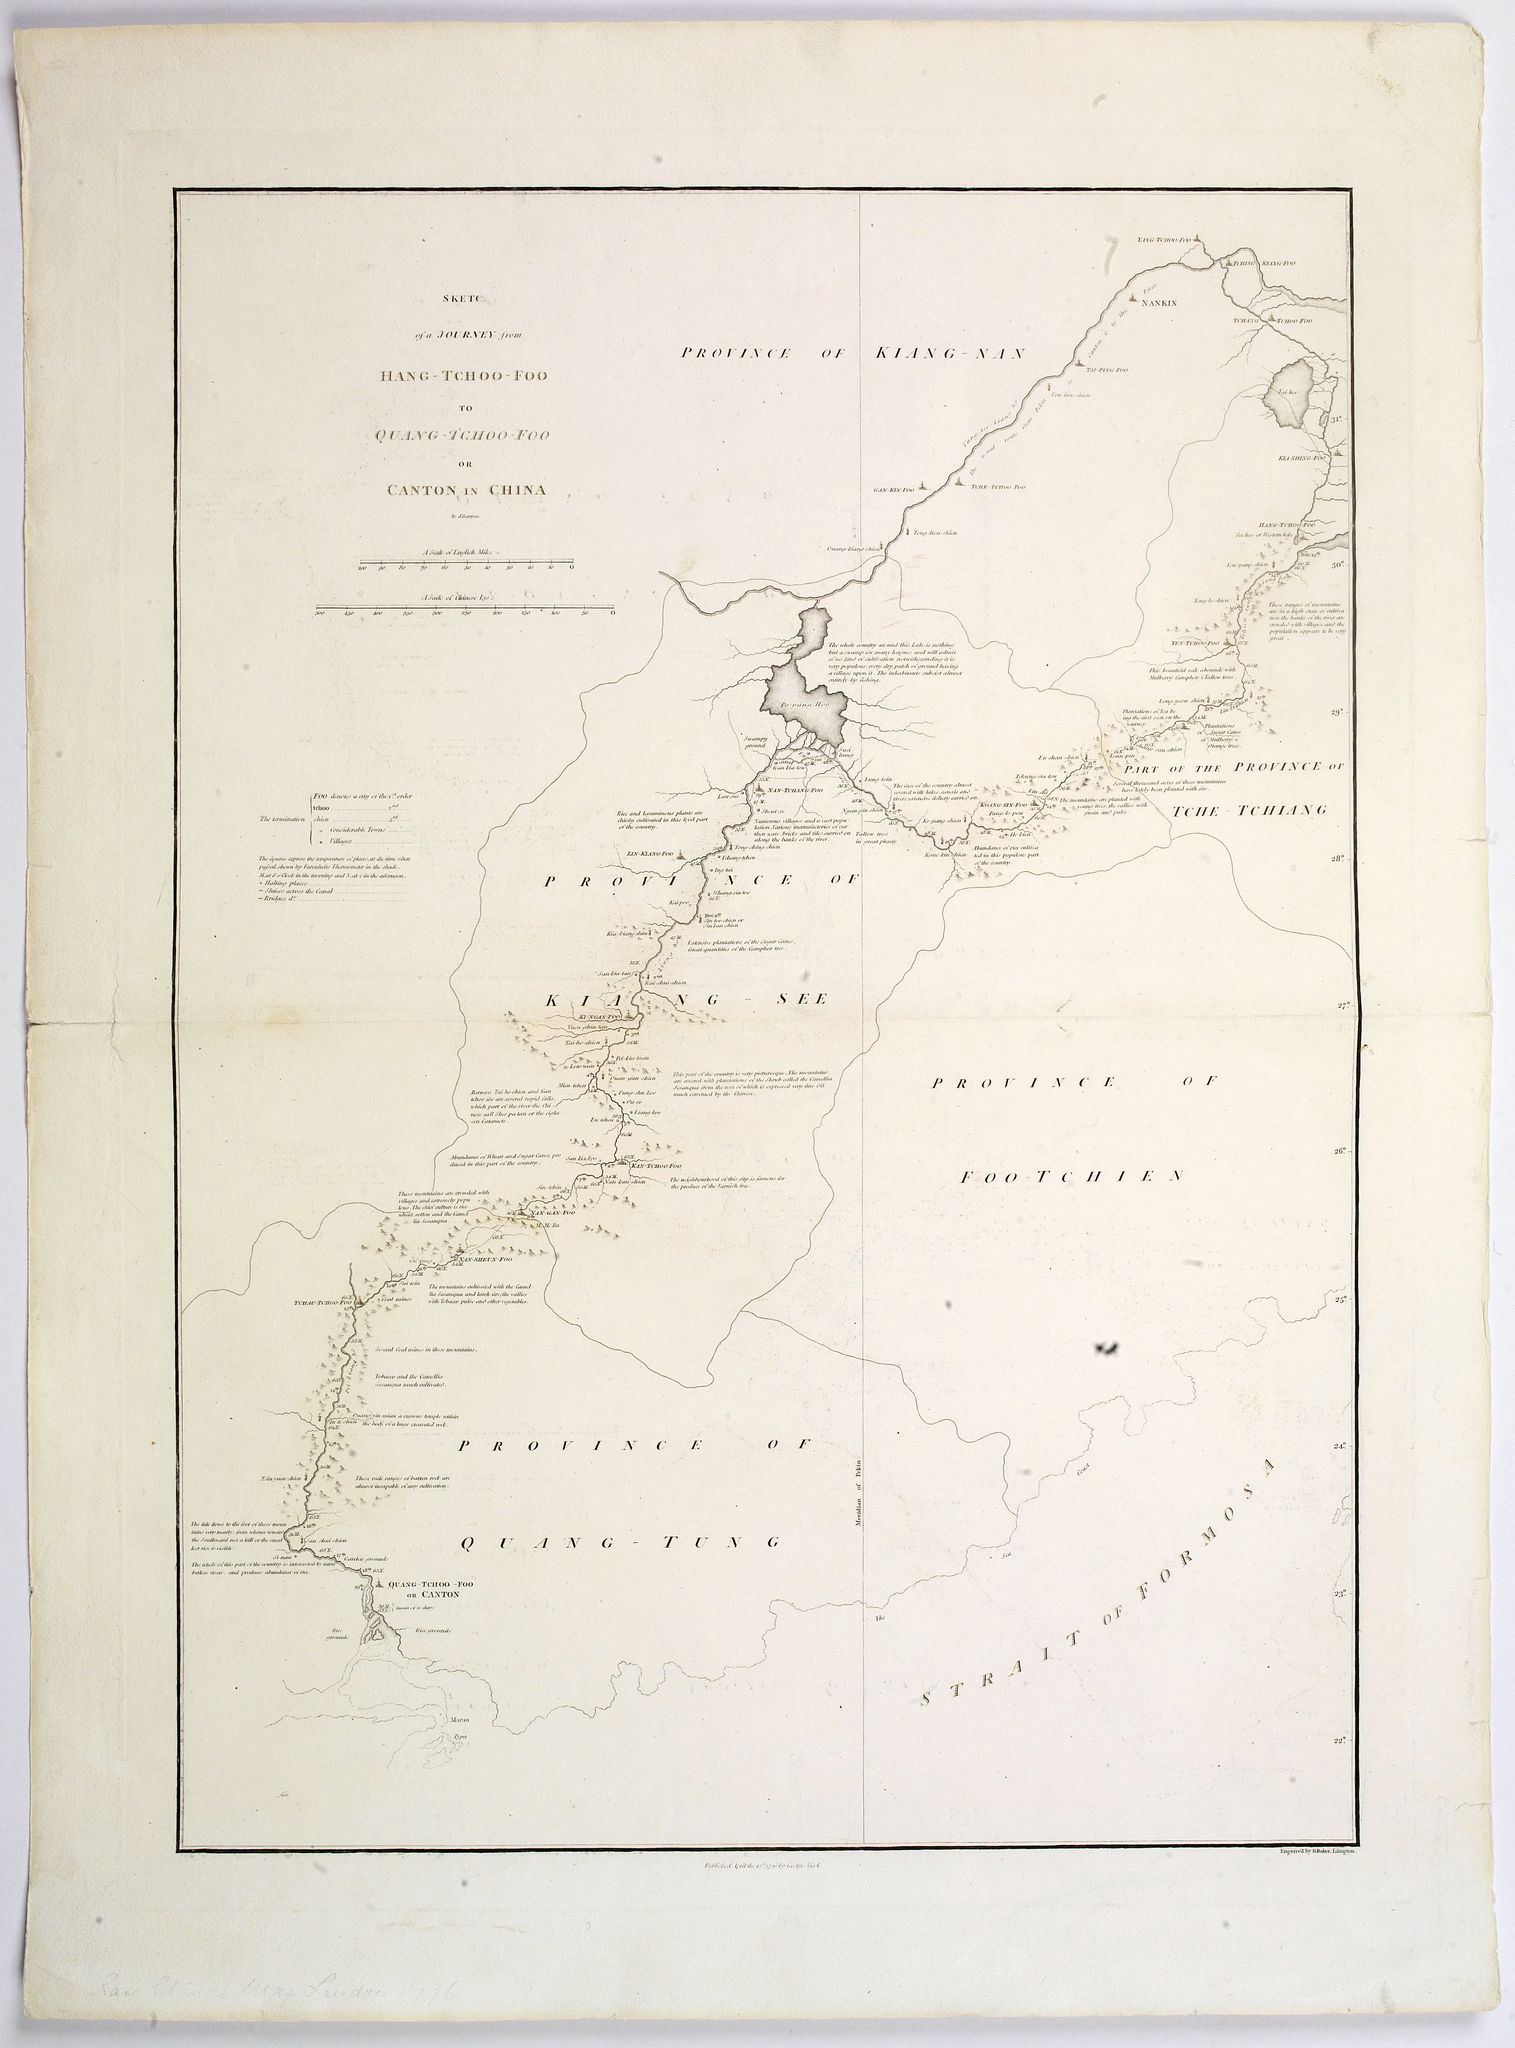 Sketch of A Journey from Hang-Tchoo-Foo To Quang-Tchoo-Foo or Canton in China